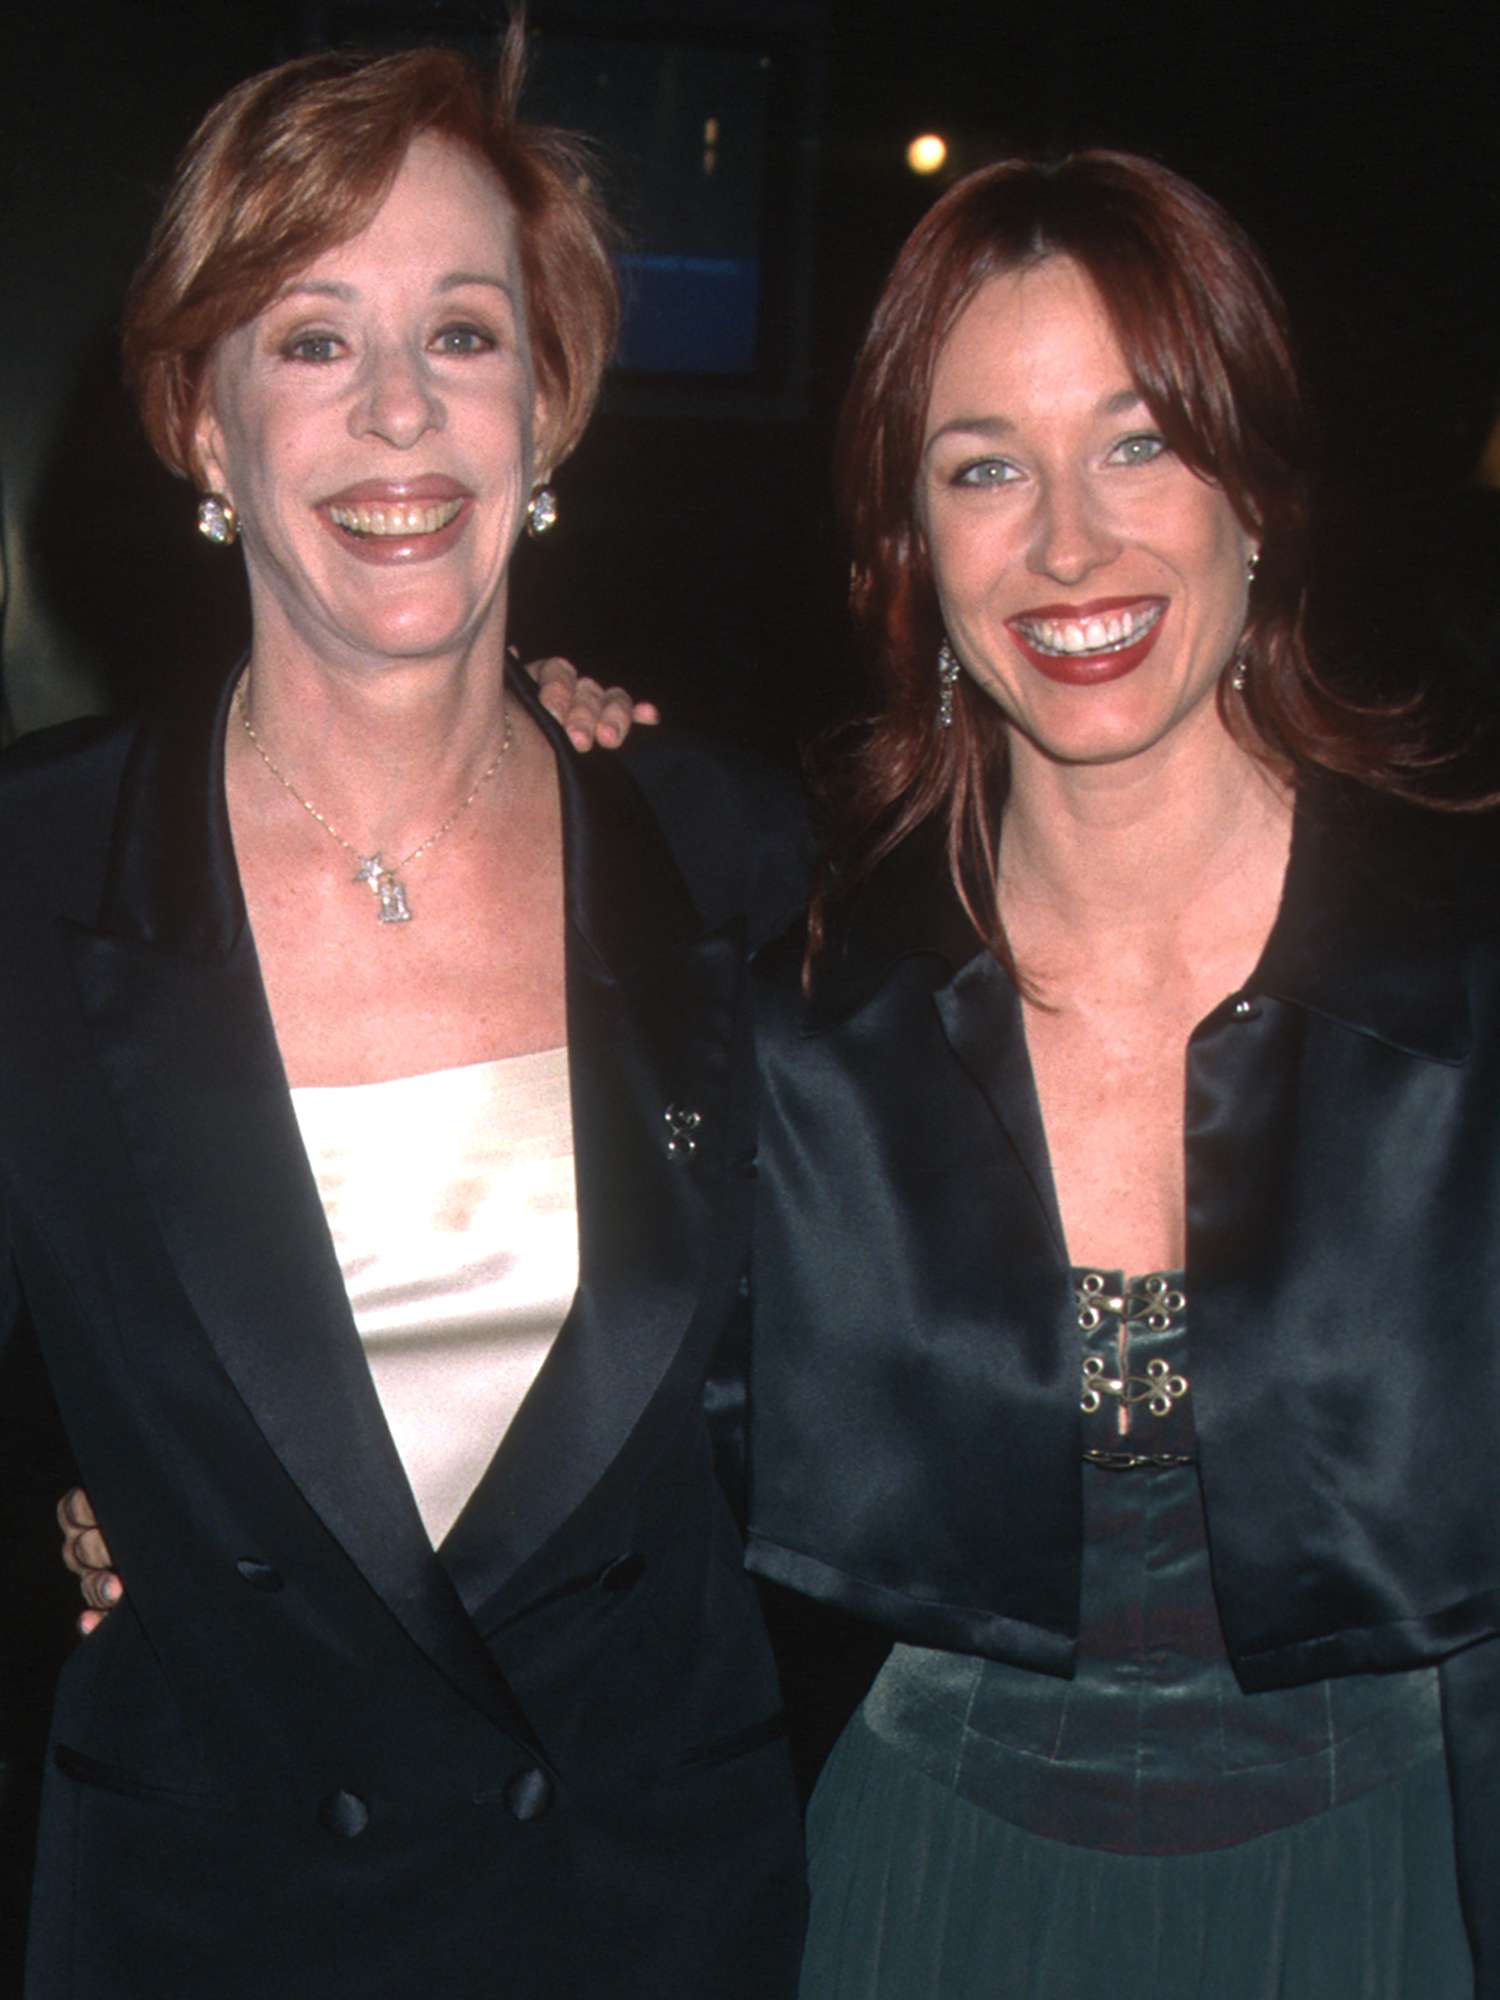 Carol Burnett (center) and her daughters, Jody Hamilton (left) and Erin Hamilton, attend the opening of the Museum of Television and Radio, Beverly Hills, California, March 17, 1996